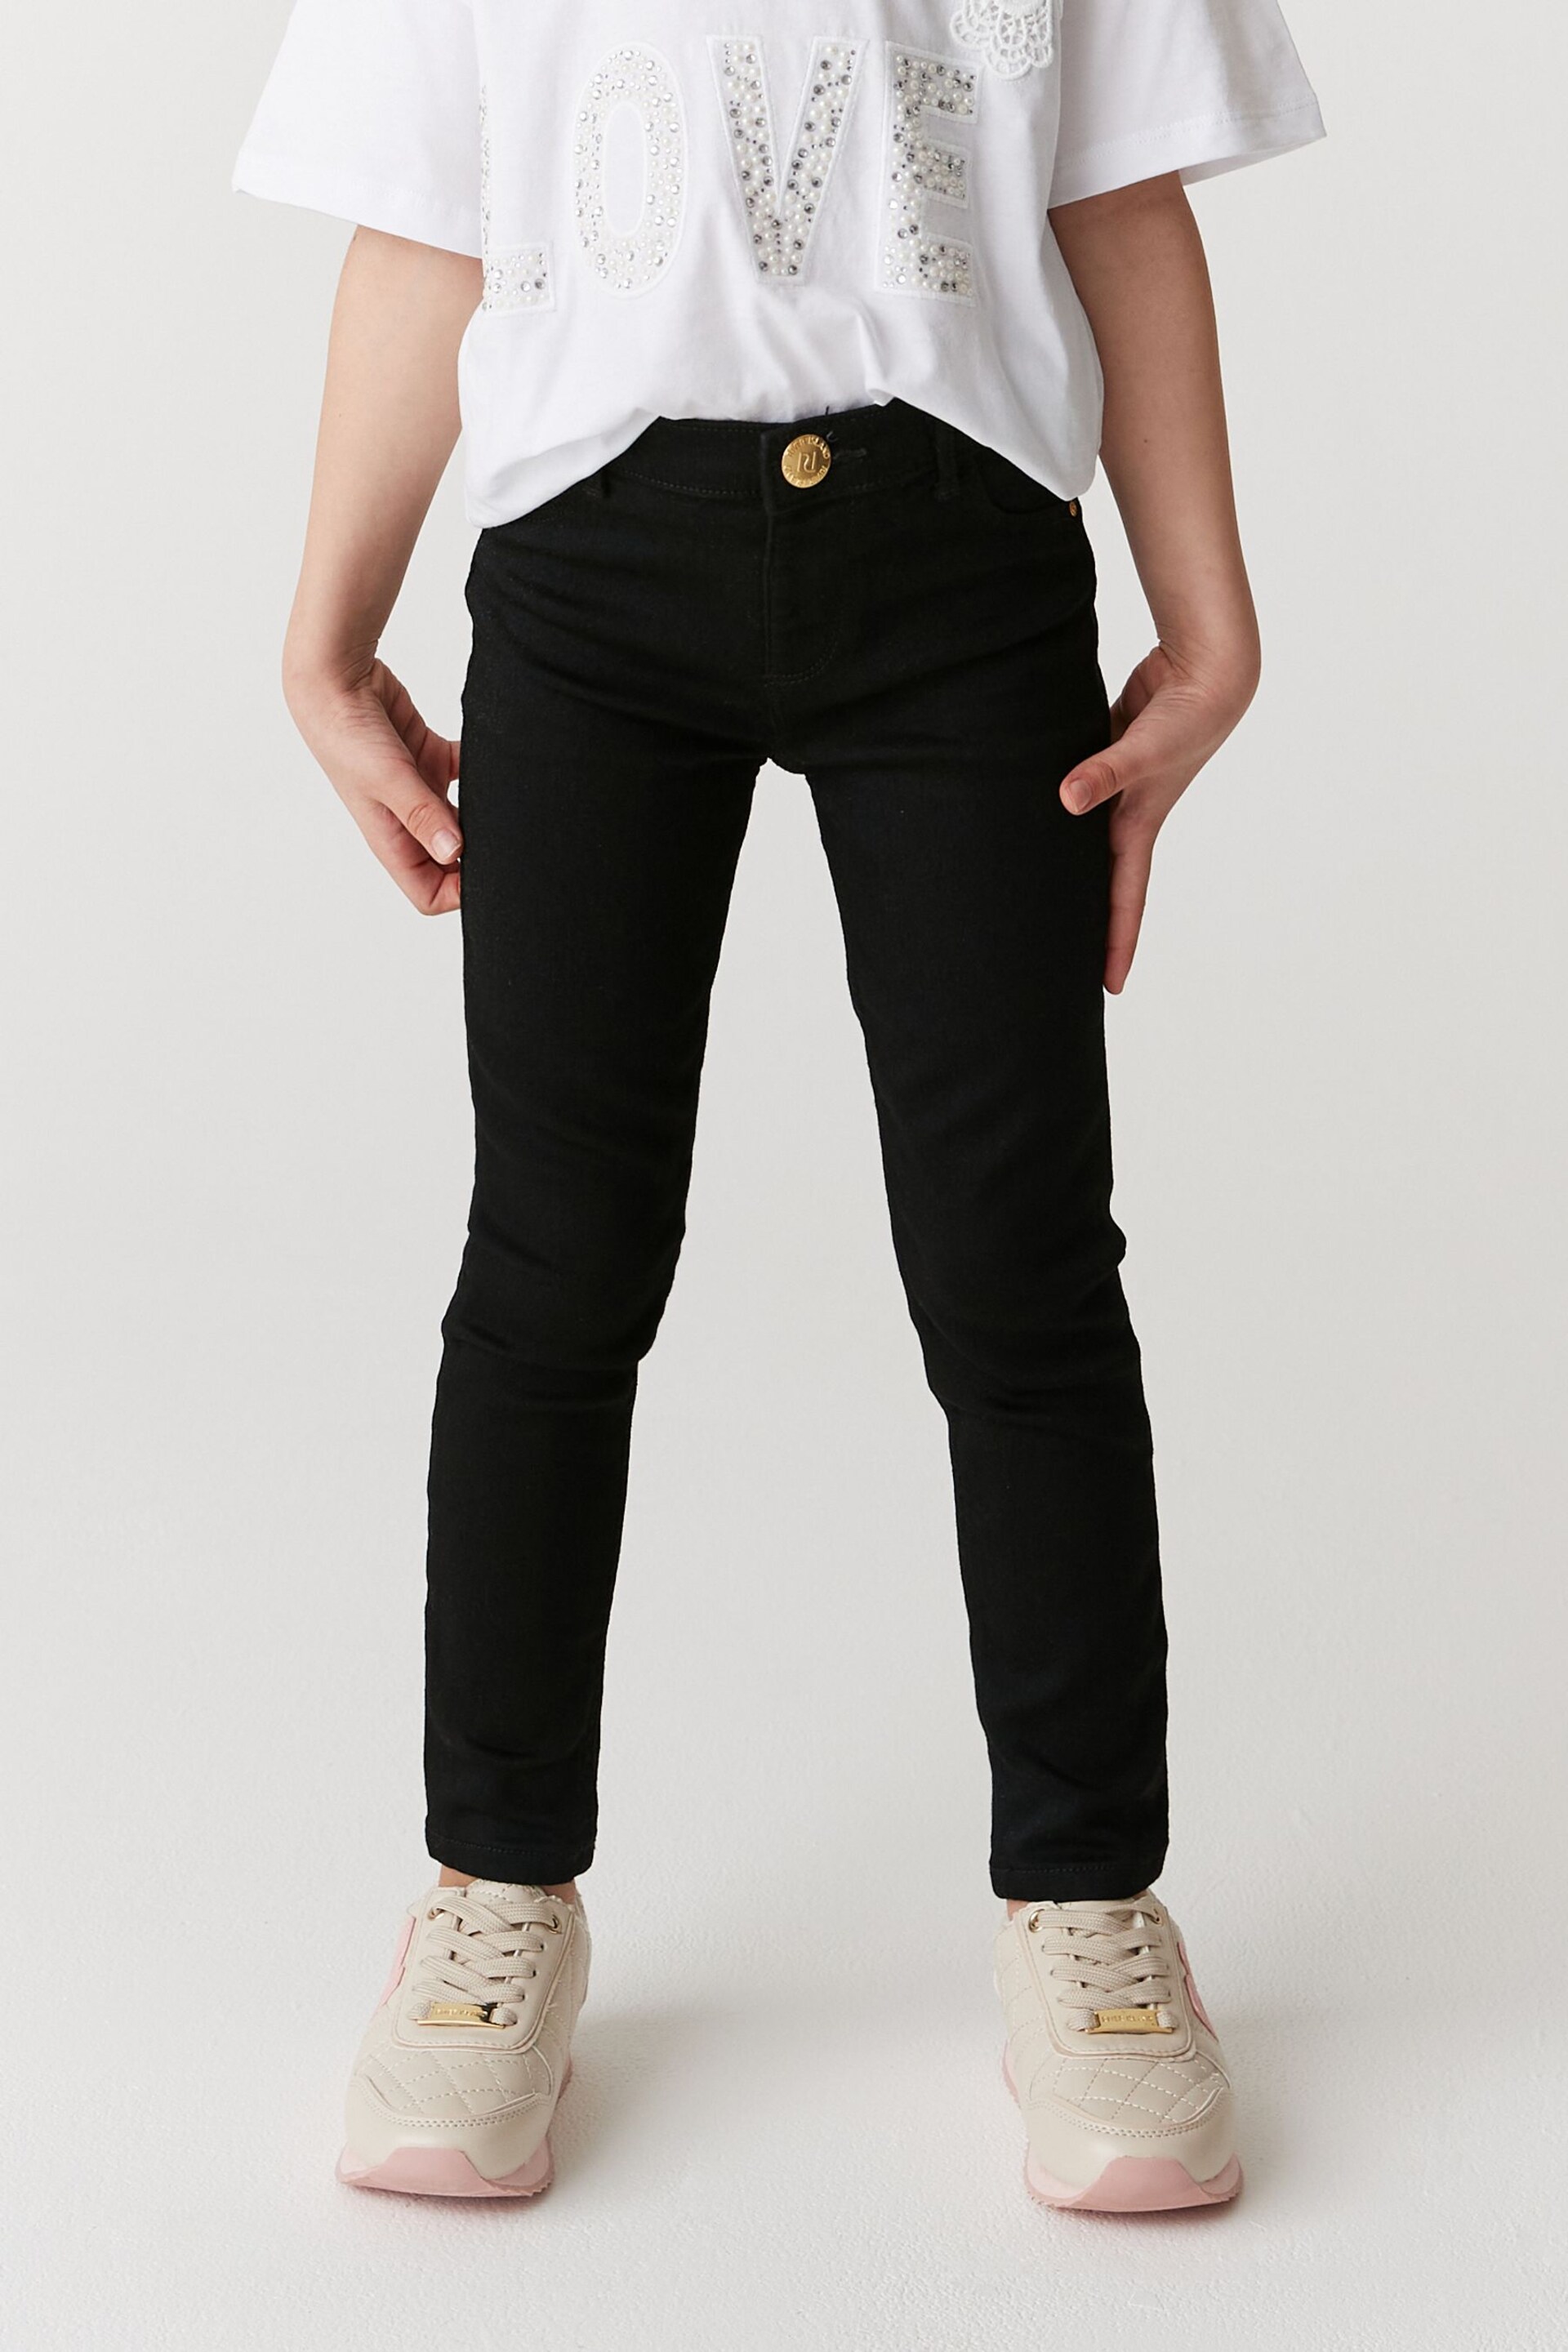 River Island Black Girls Molly Mid Rise Skinny Jeans - Image 1 of 4